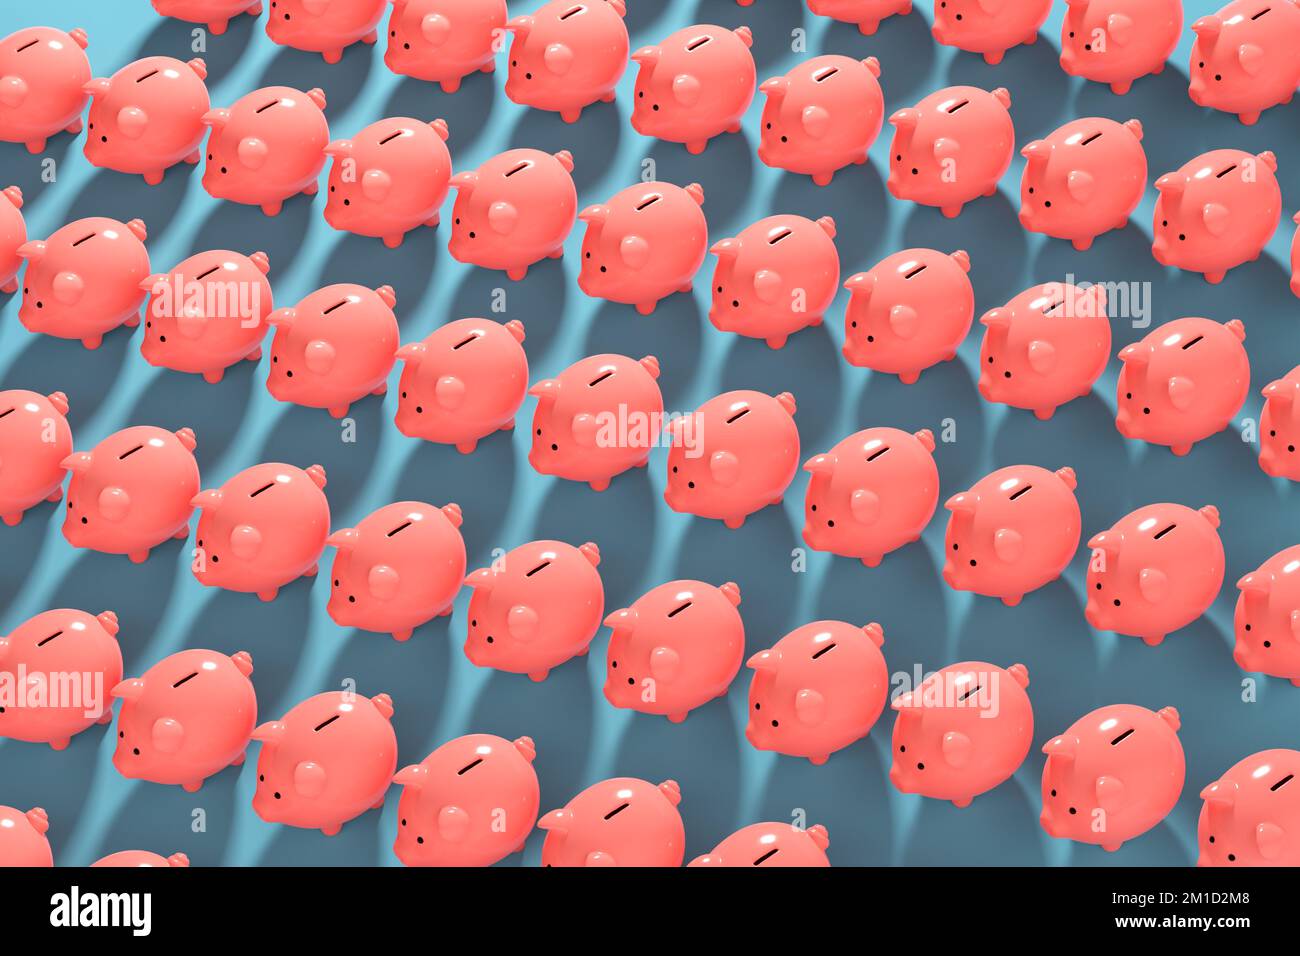 Seamless repetitive Piggy Bank pattern on blue background. Saving money, financial investment and household budget concepts. 3D rendering. Stock Photo